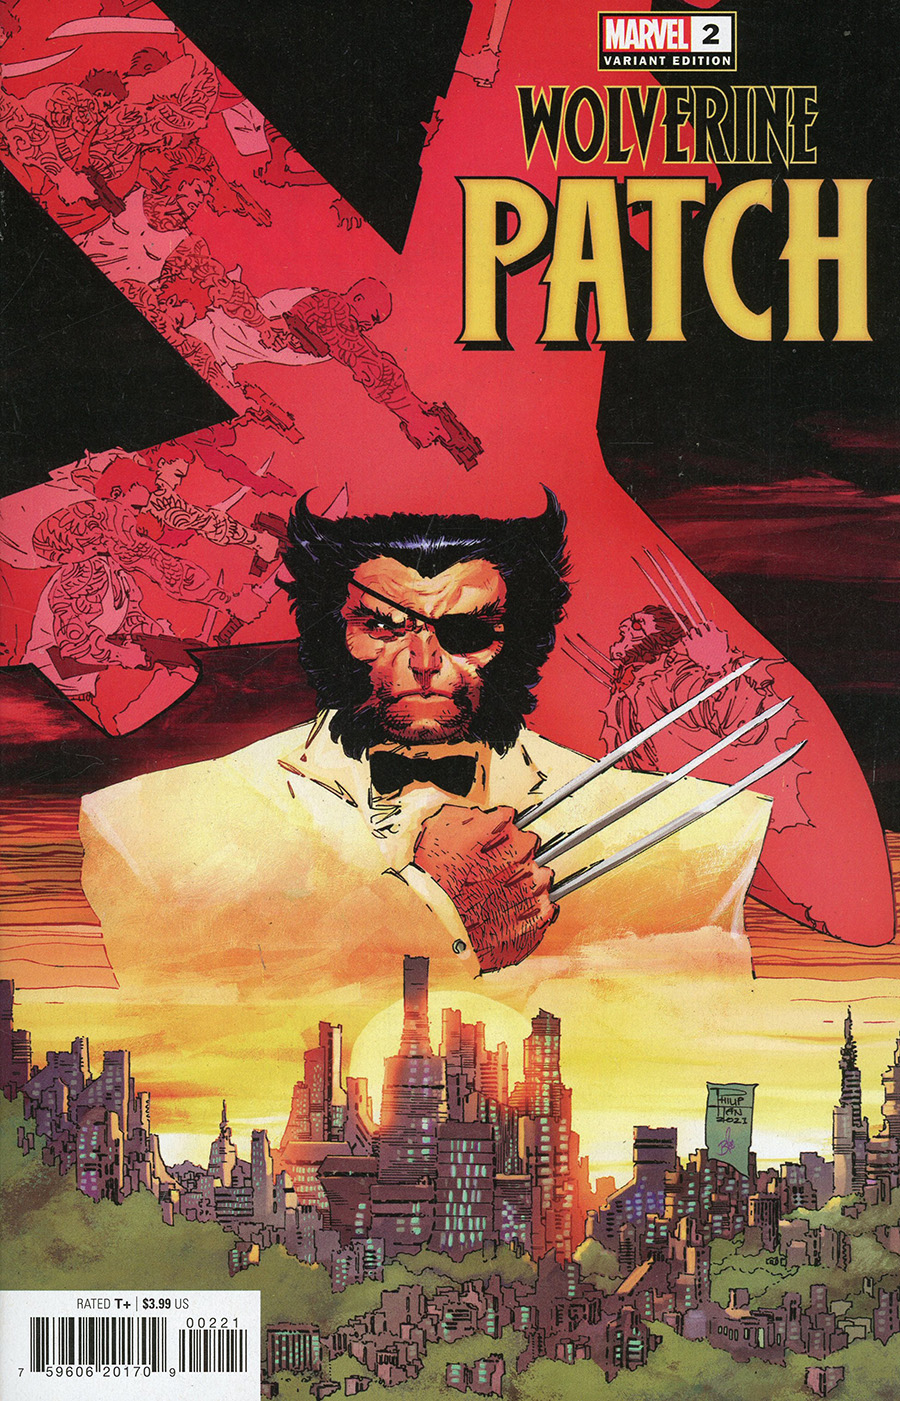 WOLVERINE PATCH #1 2ND PRINTING SHAW VARIANT 2022 